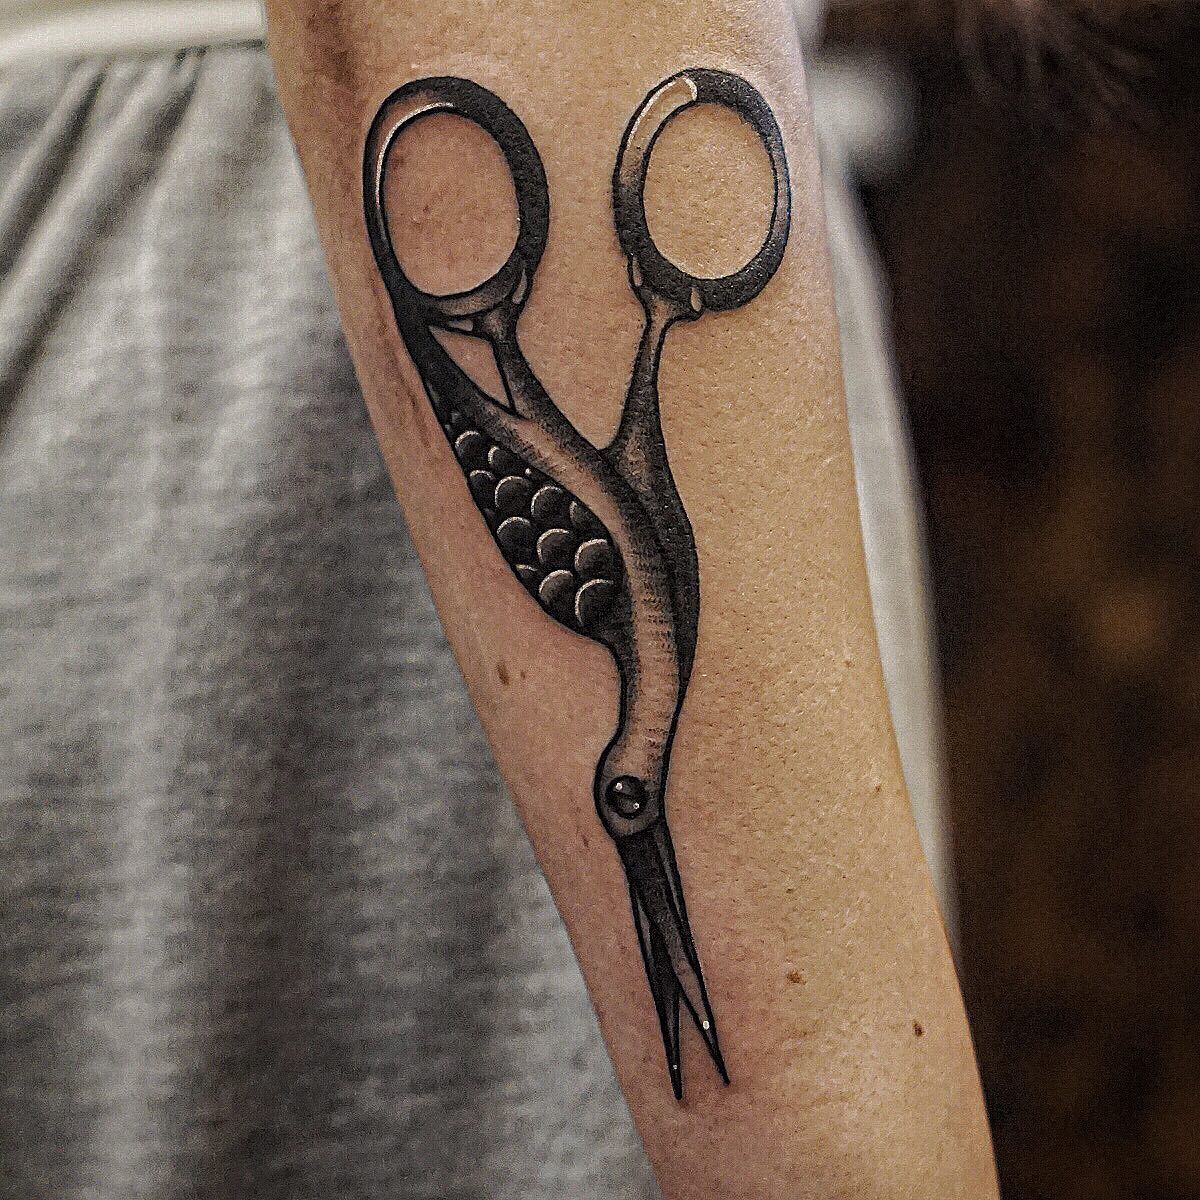 Veronica Lee Tattoo - Custom Design watercolour scissors for a beautiful  hairdresser ) Was amazing meeting you again after so many years x | Facebook